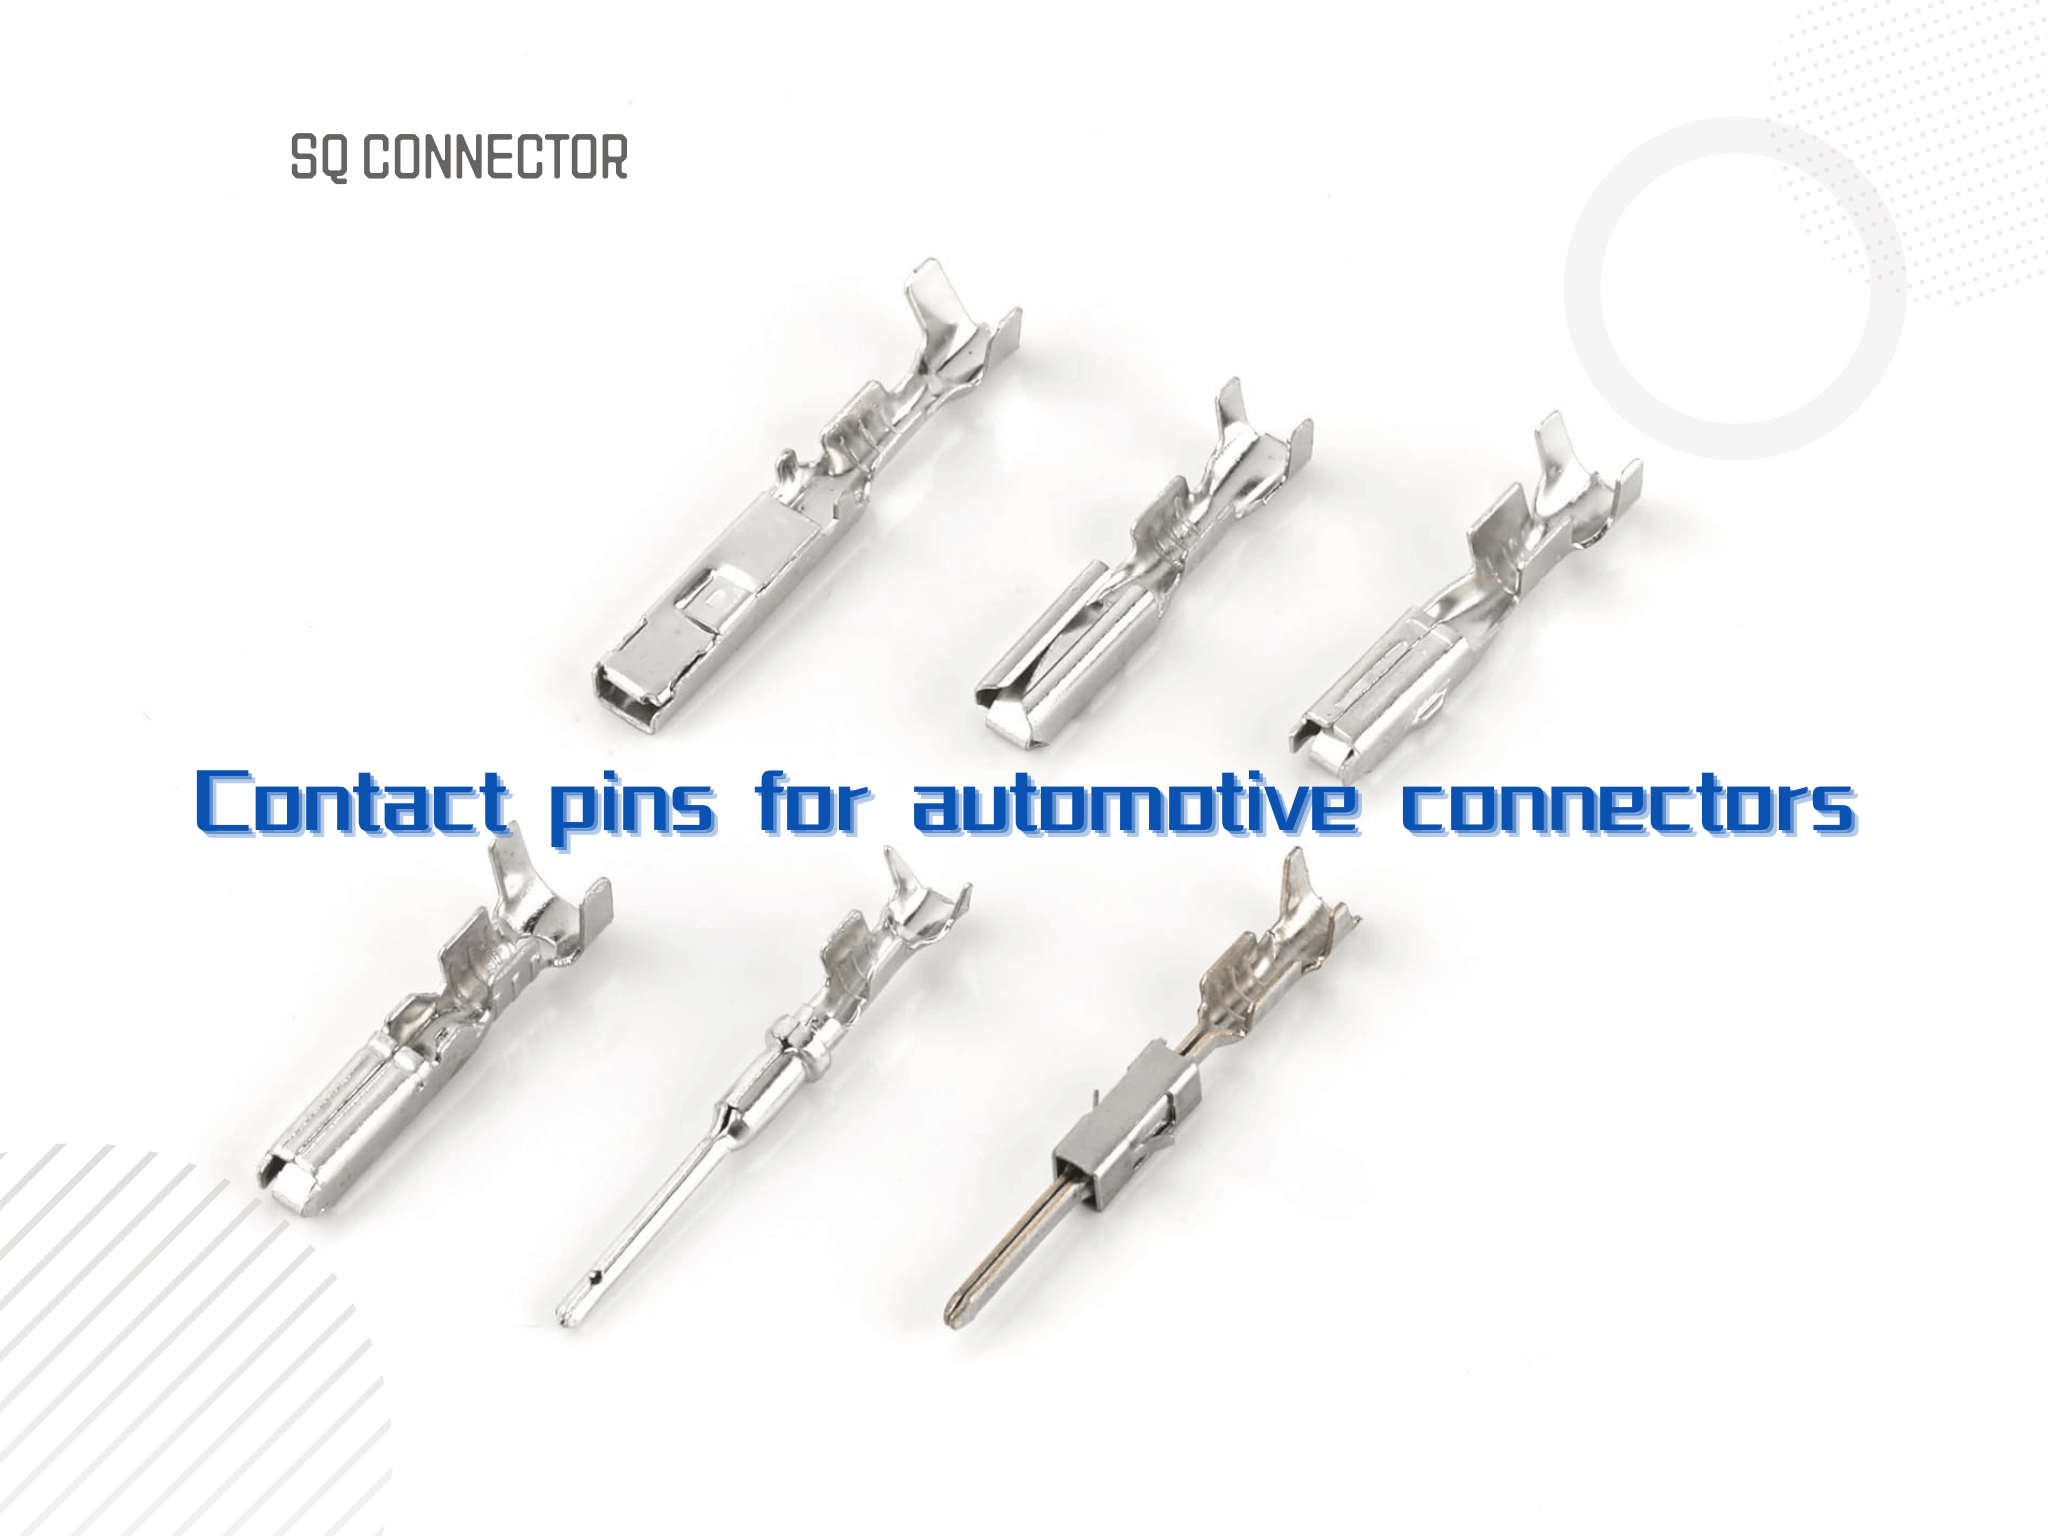 The contact pin standard | How to crimp and remove connector pins?